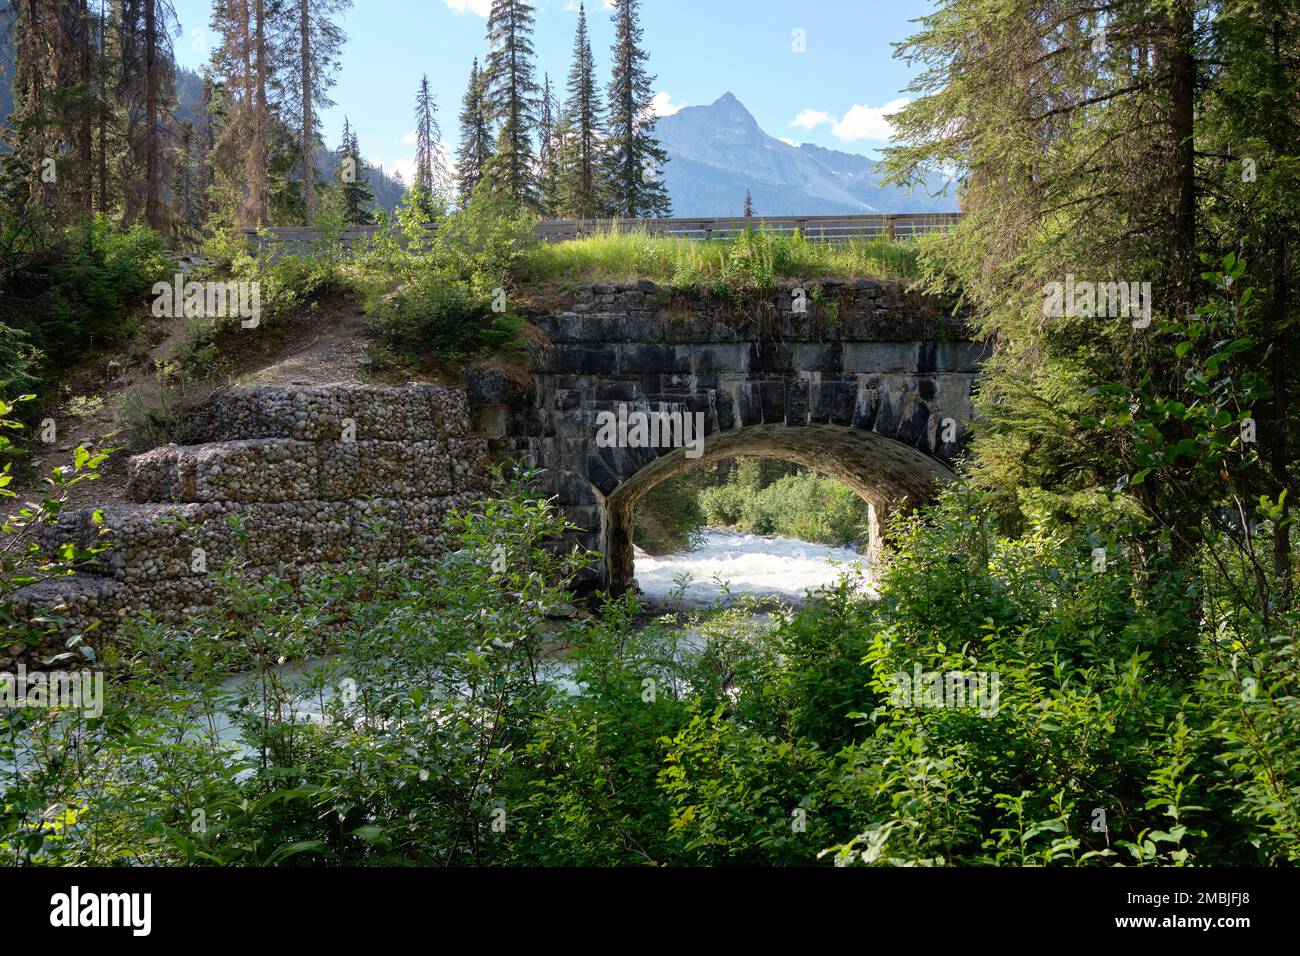 Old stone bridge built originally for trains arches over the churning waters of Illecillewaet River, Glacier national Park, BC Stock Photo